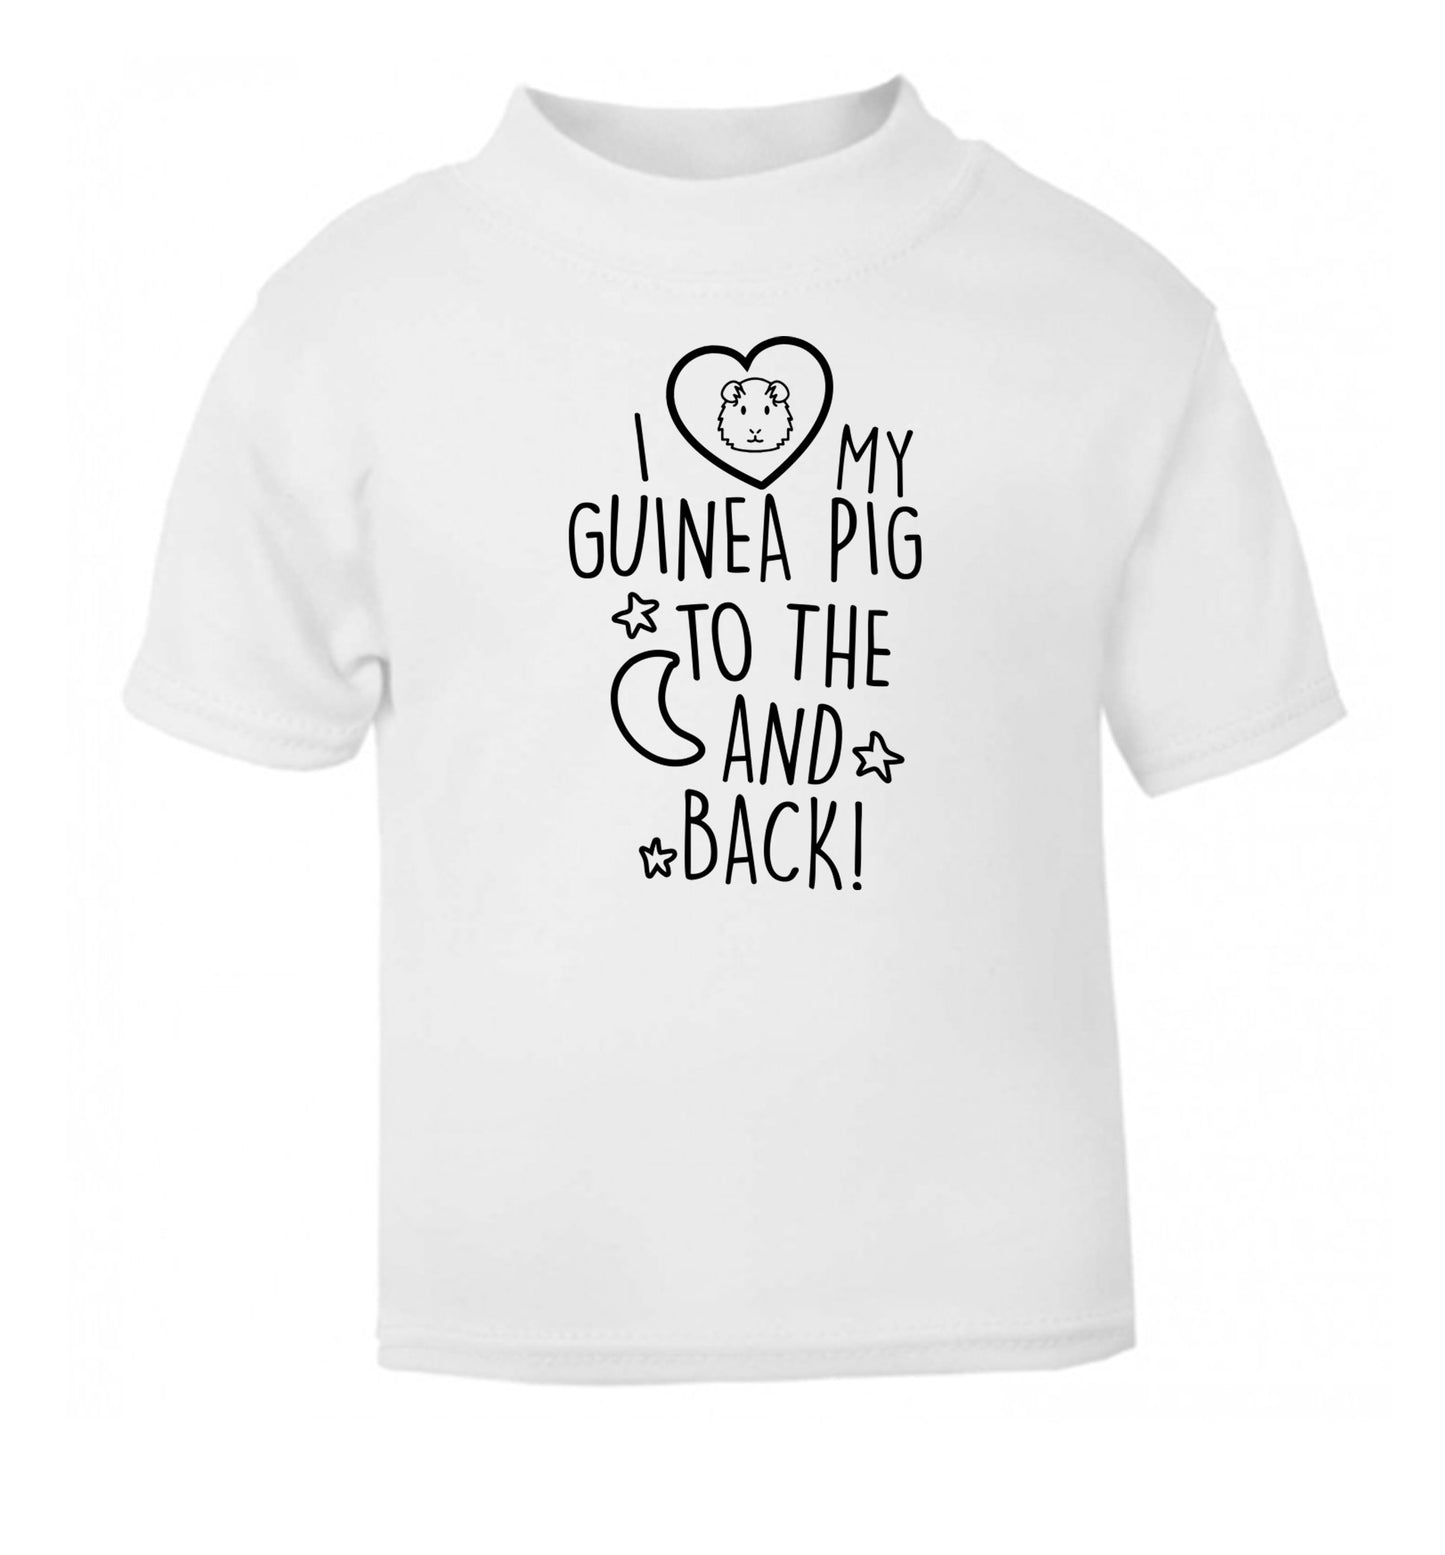 I love my guinea pig to the moon and back white Baby Toddler Tshirt 2 Years